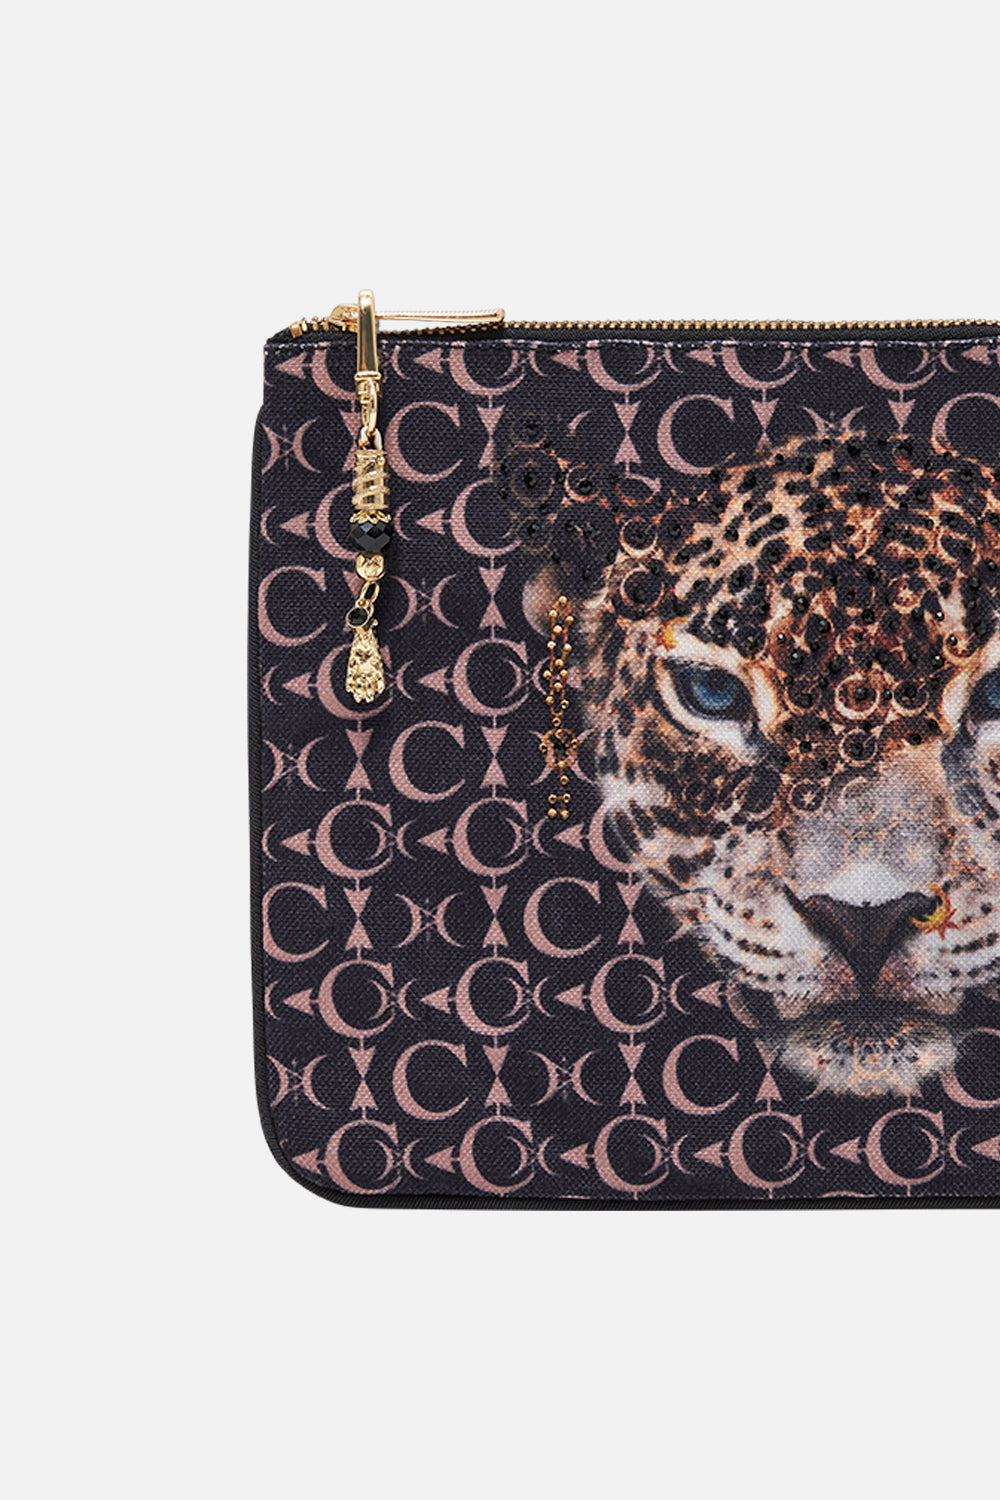 SMALL CANVAS CLUTCH WILDCAT SOIREE